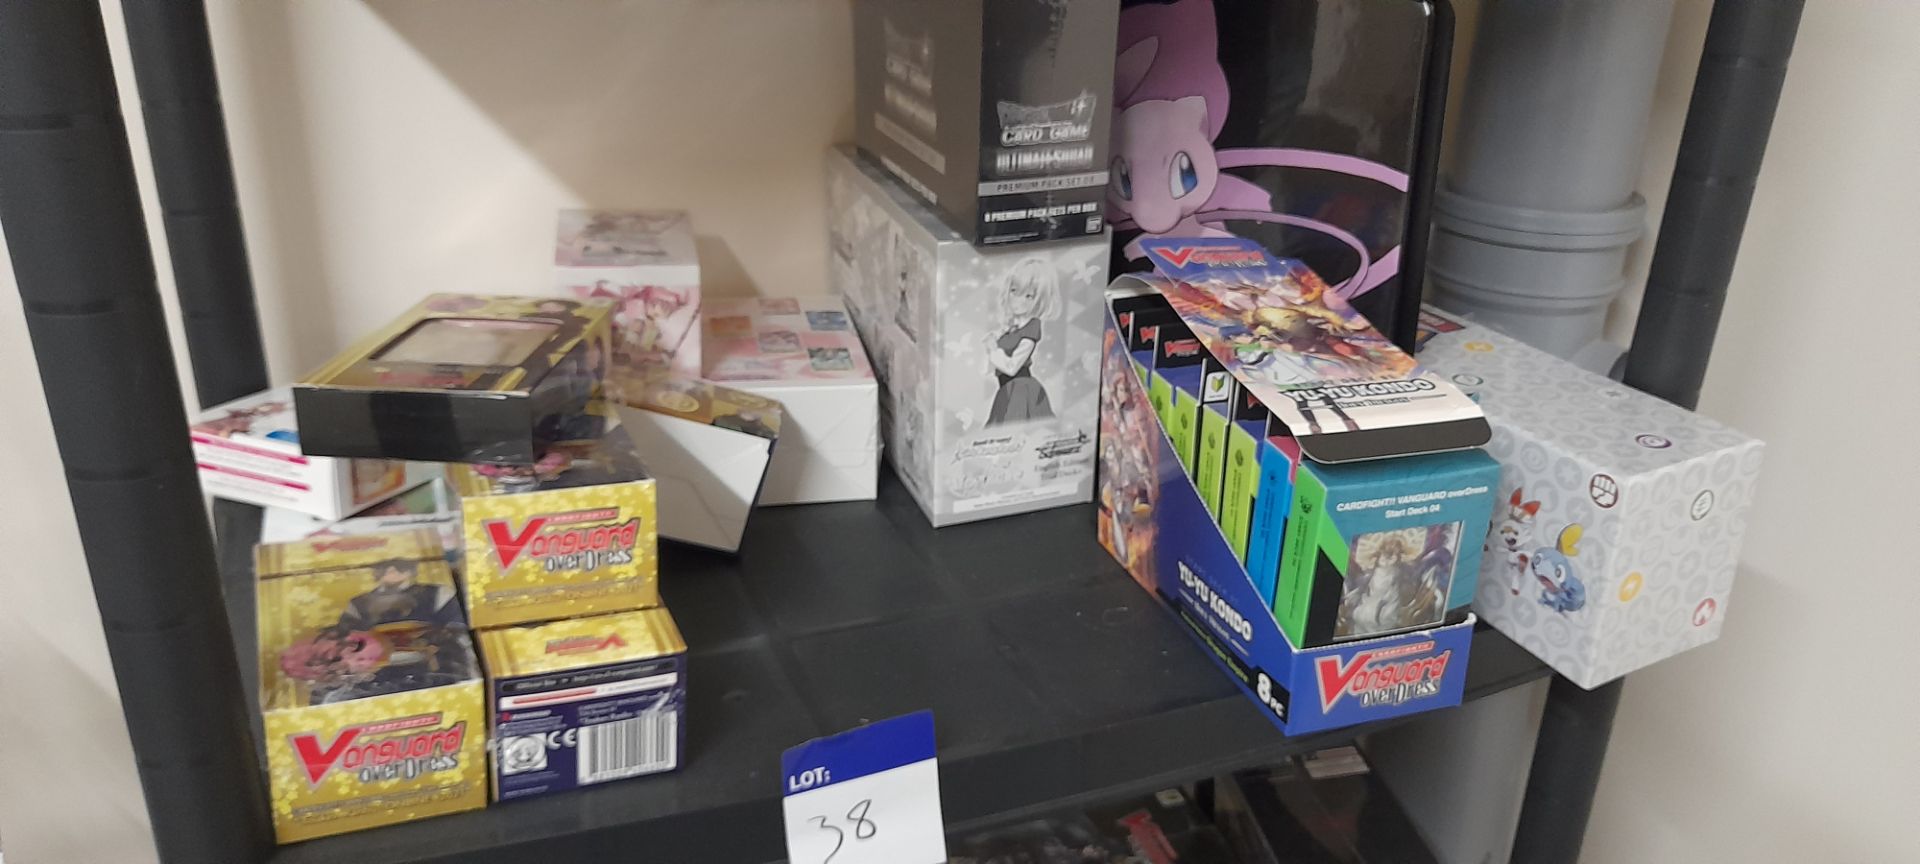 Contents of Five tier plastic shelving unit and metal display stand to include Vanguard CardFight, - Image 3 of 6